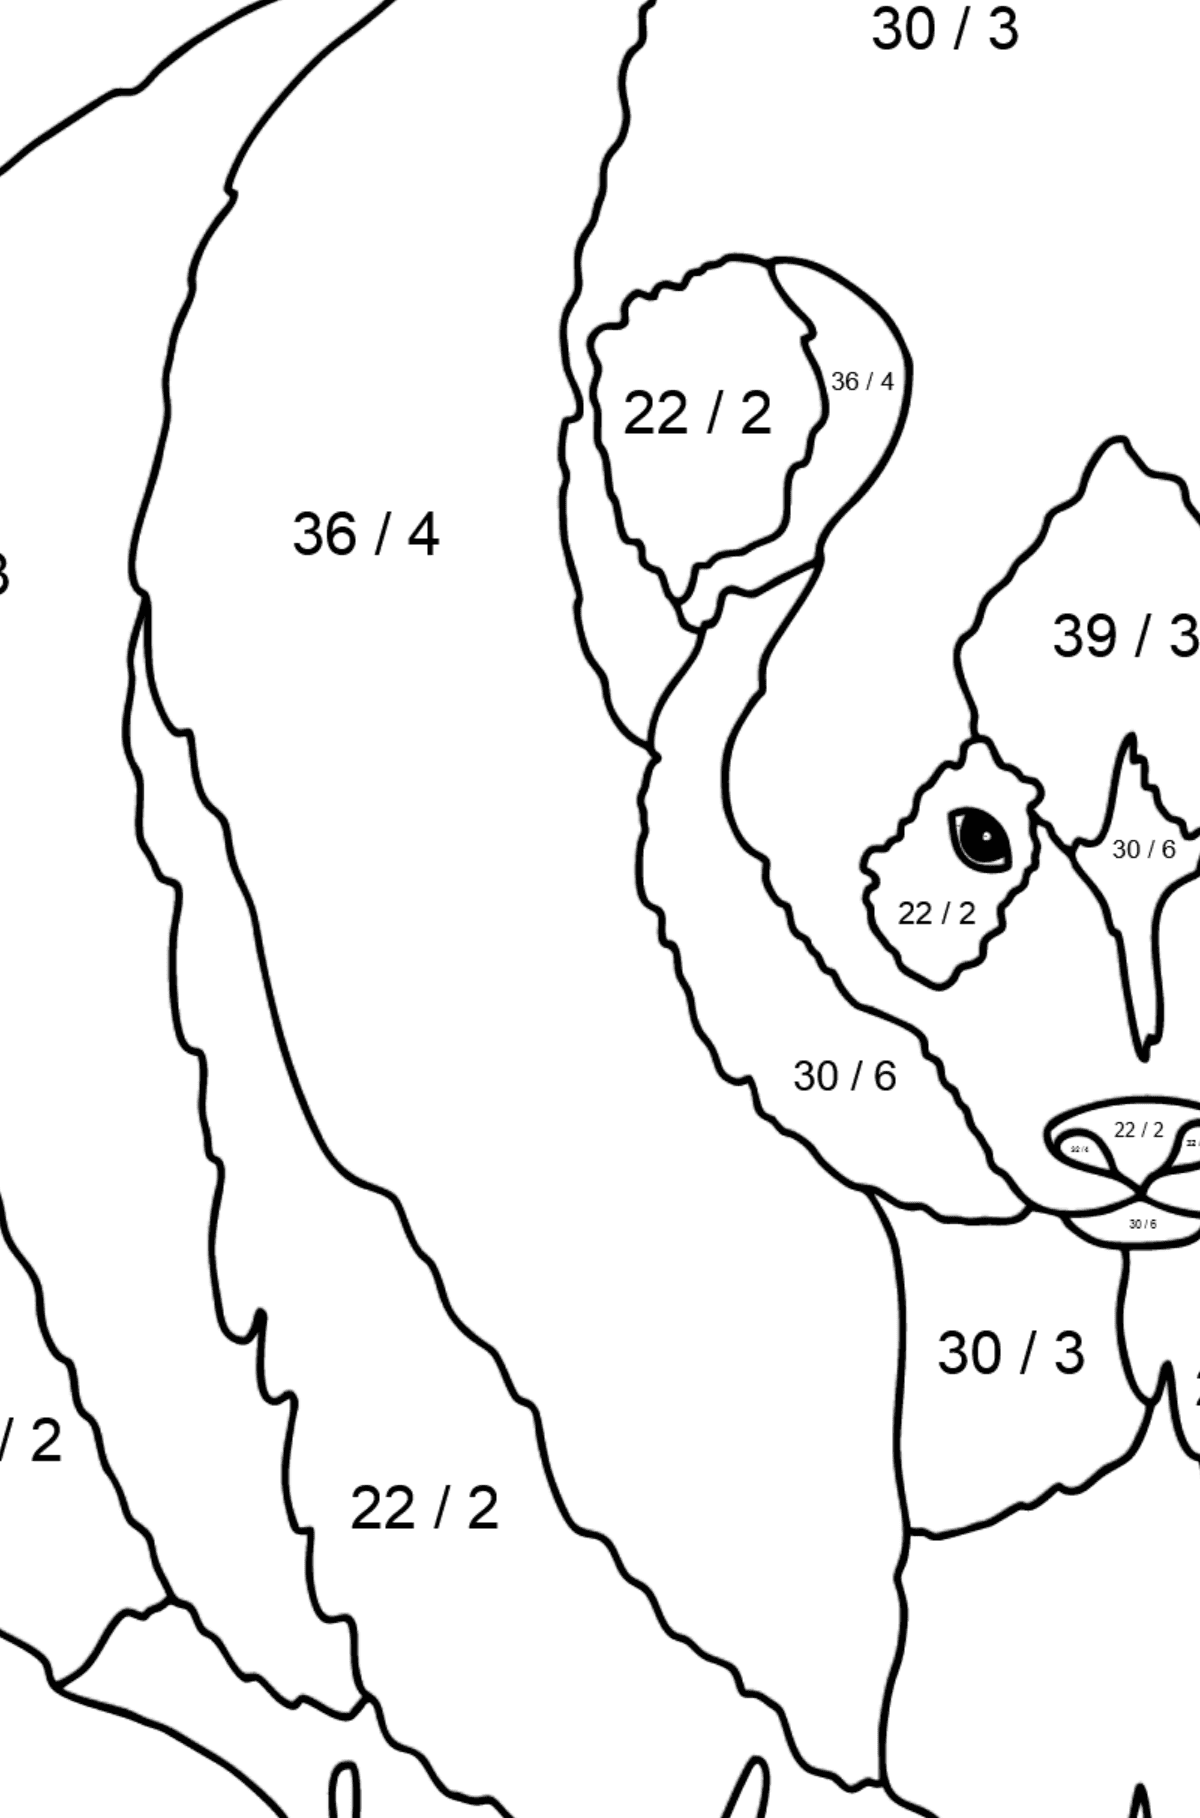 Coloring Page - A Panda is on a Hunt - Math Coloring - Division for Kids